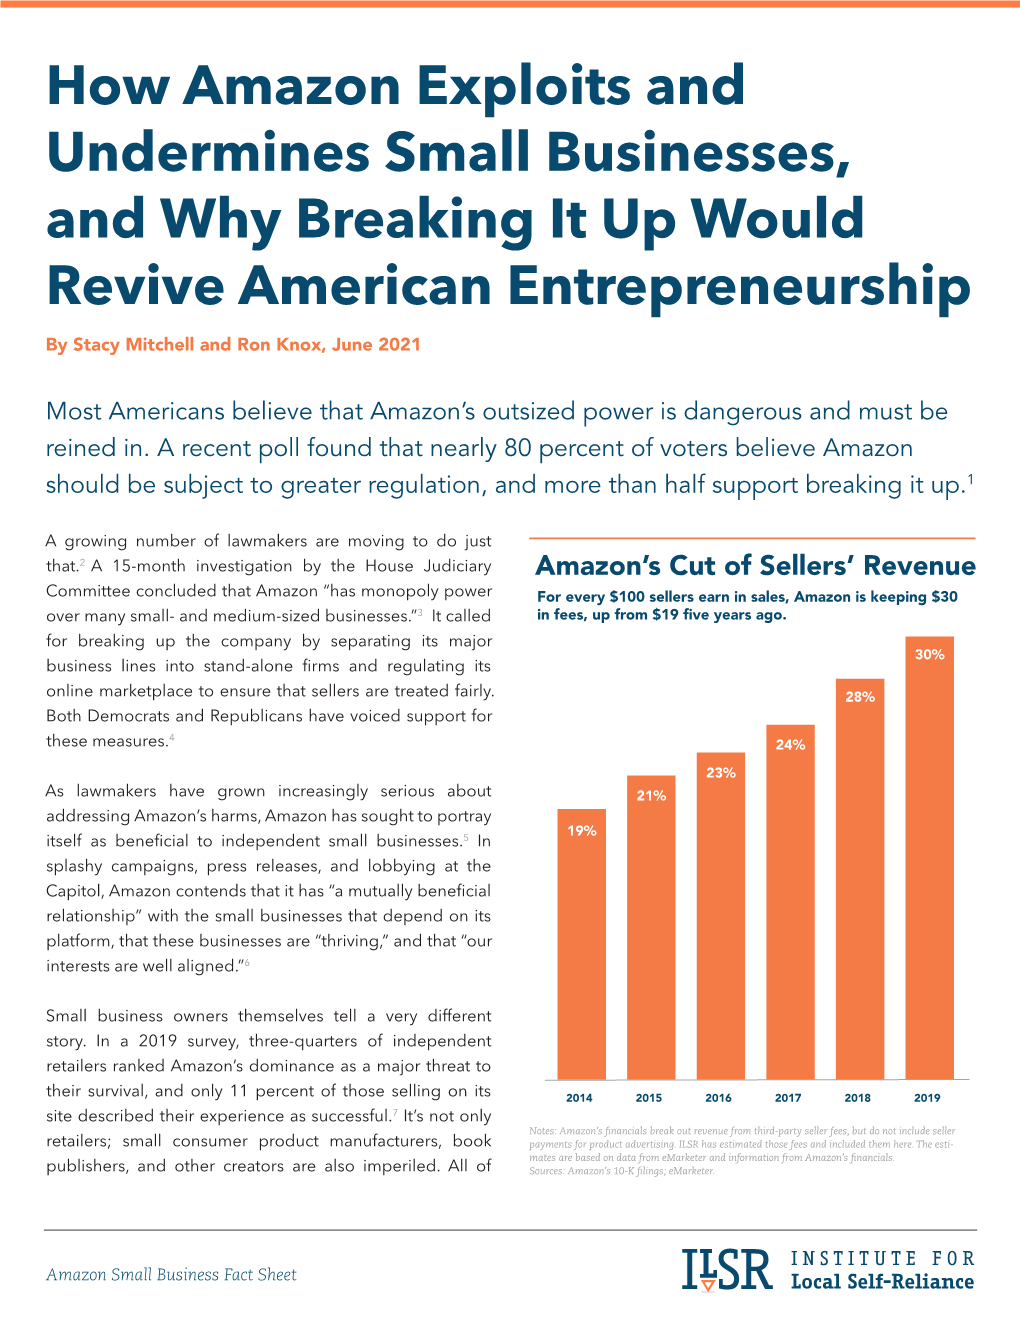 How Amazon Exploits and Undermines Small Businesses, and Why Breaking It up Would Revive American Entrepreneurship by Stacy Mitchell and Ron Knox, June 2021